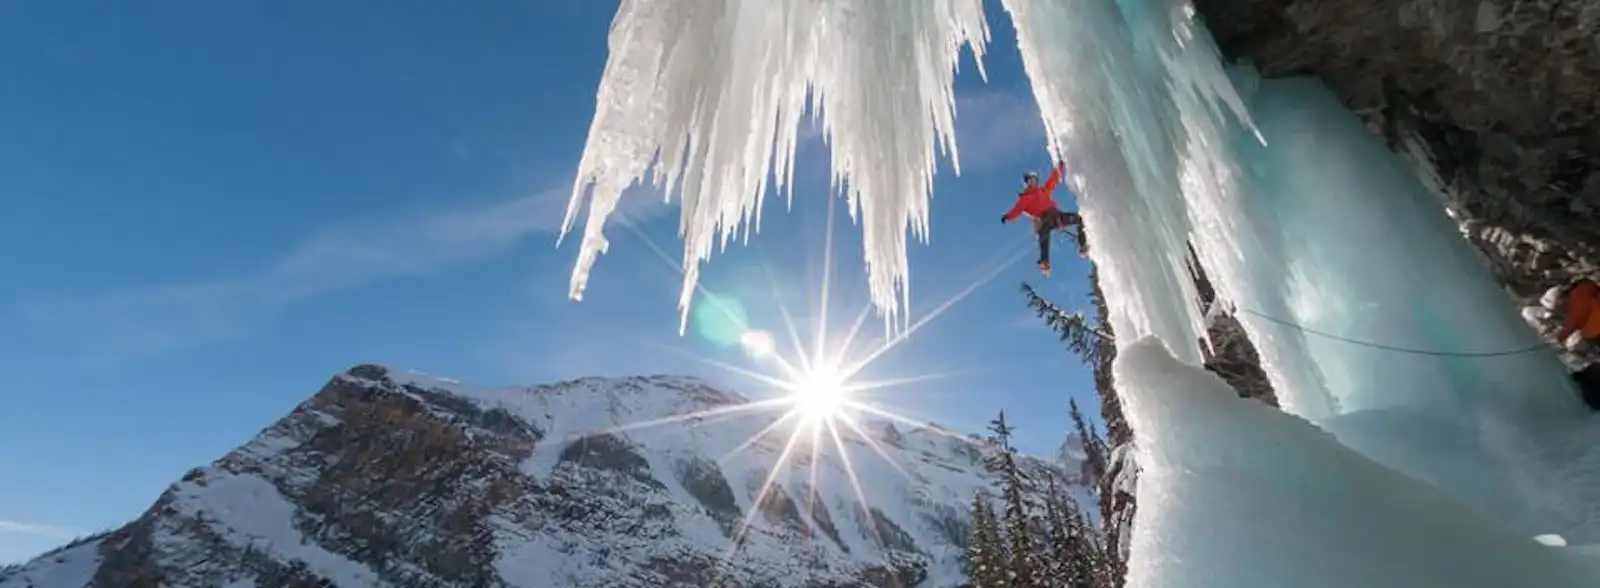 BANFF Mountain Film festival 2016: 3 inspiring reasons to attend! post image